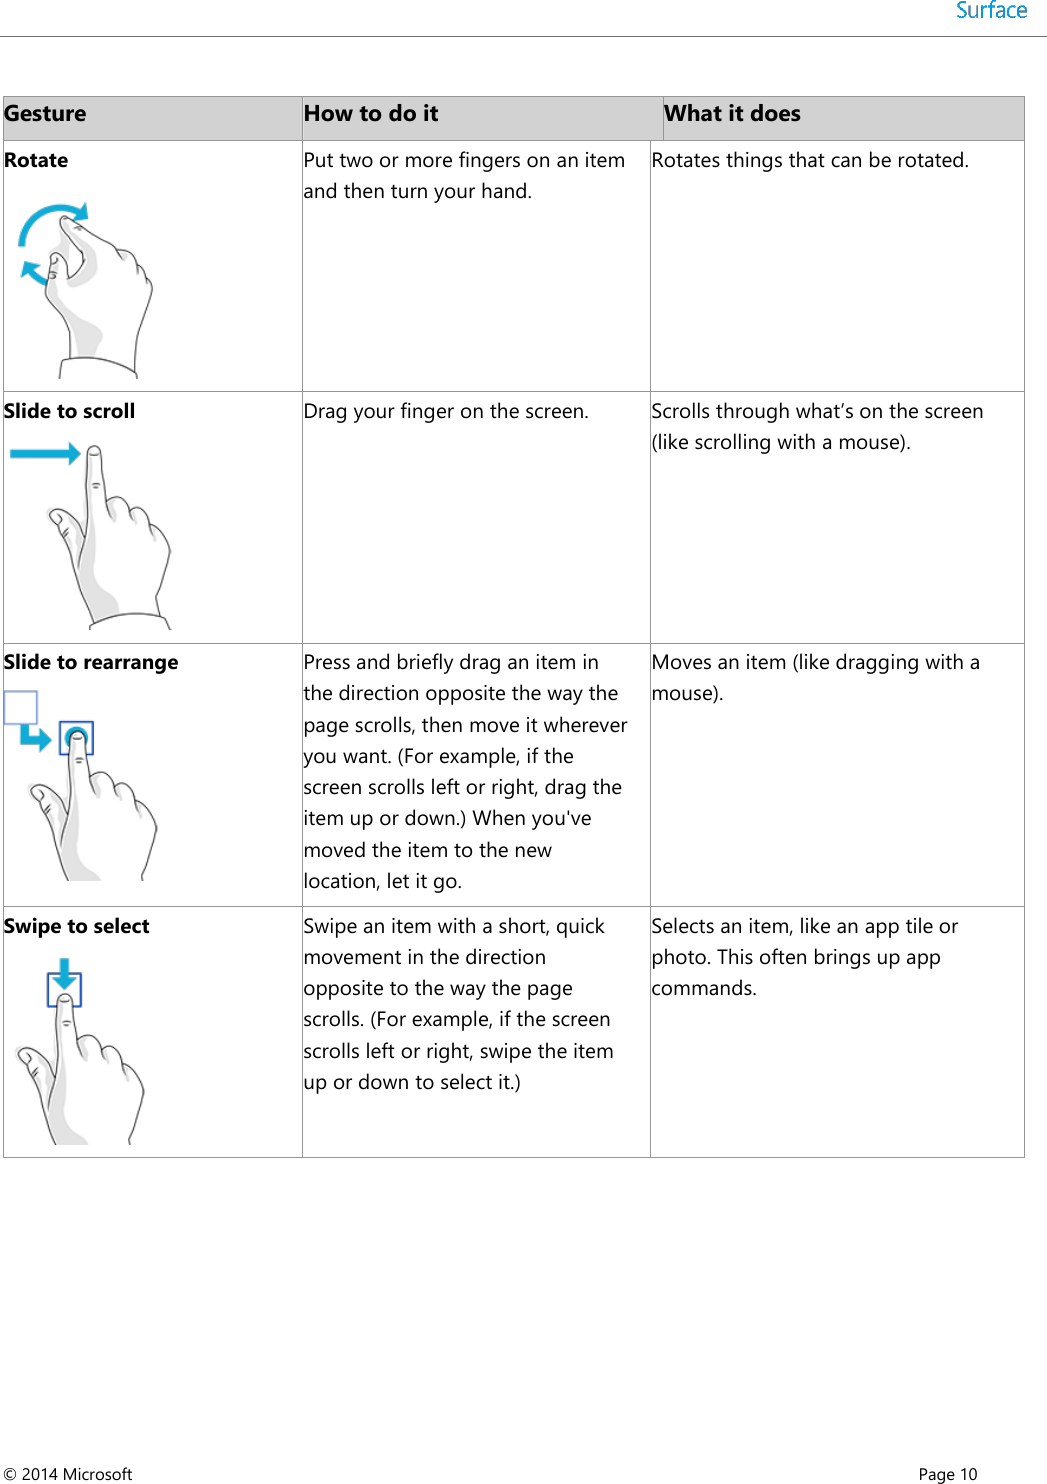  © 2014 Microsoft      Page 10  Gesture How to do it What it does Rotate  Put two or more fingers on an item and then turn your hand. Rotates things that can be rotated. Slide to scroll  Drag your finger on the screen. Scrolls through what’s on the screen (like scrolling with a mouse). Slide to rearrange  Press and briefly drag an item in the direction opposite the way the page scrolls, then move it wherever you want. (For example, if the screen scrolls left or right, drag the item up or down.) When you&apos;ve moved the item to the new location, let it go. Moves an item (like dragging with a mouse).   Swipe to select  Swipe an item with a short, quick movement in the direction opposite to the way the page scrolls. (For example, if the screen scrolls left or right, swipe the item up or down to select it.)  Selects an item, like an app tile or photo. This often brings up app commands. 